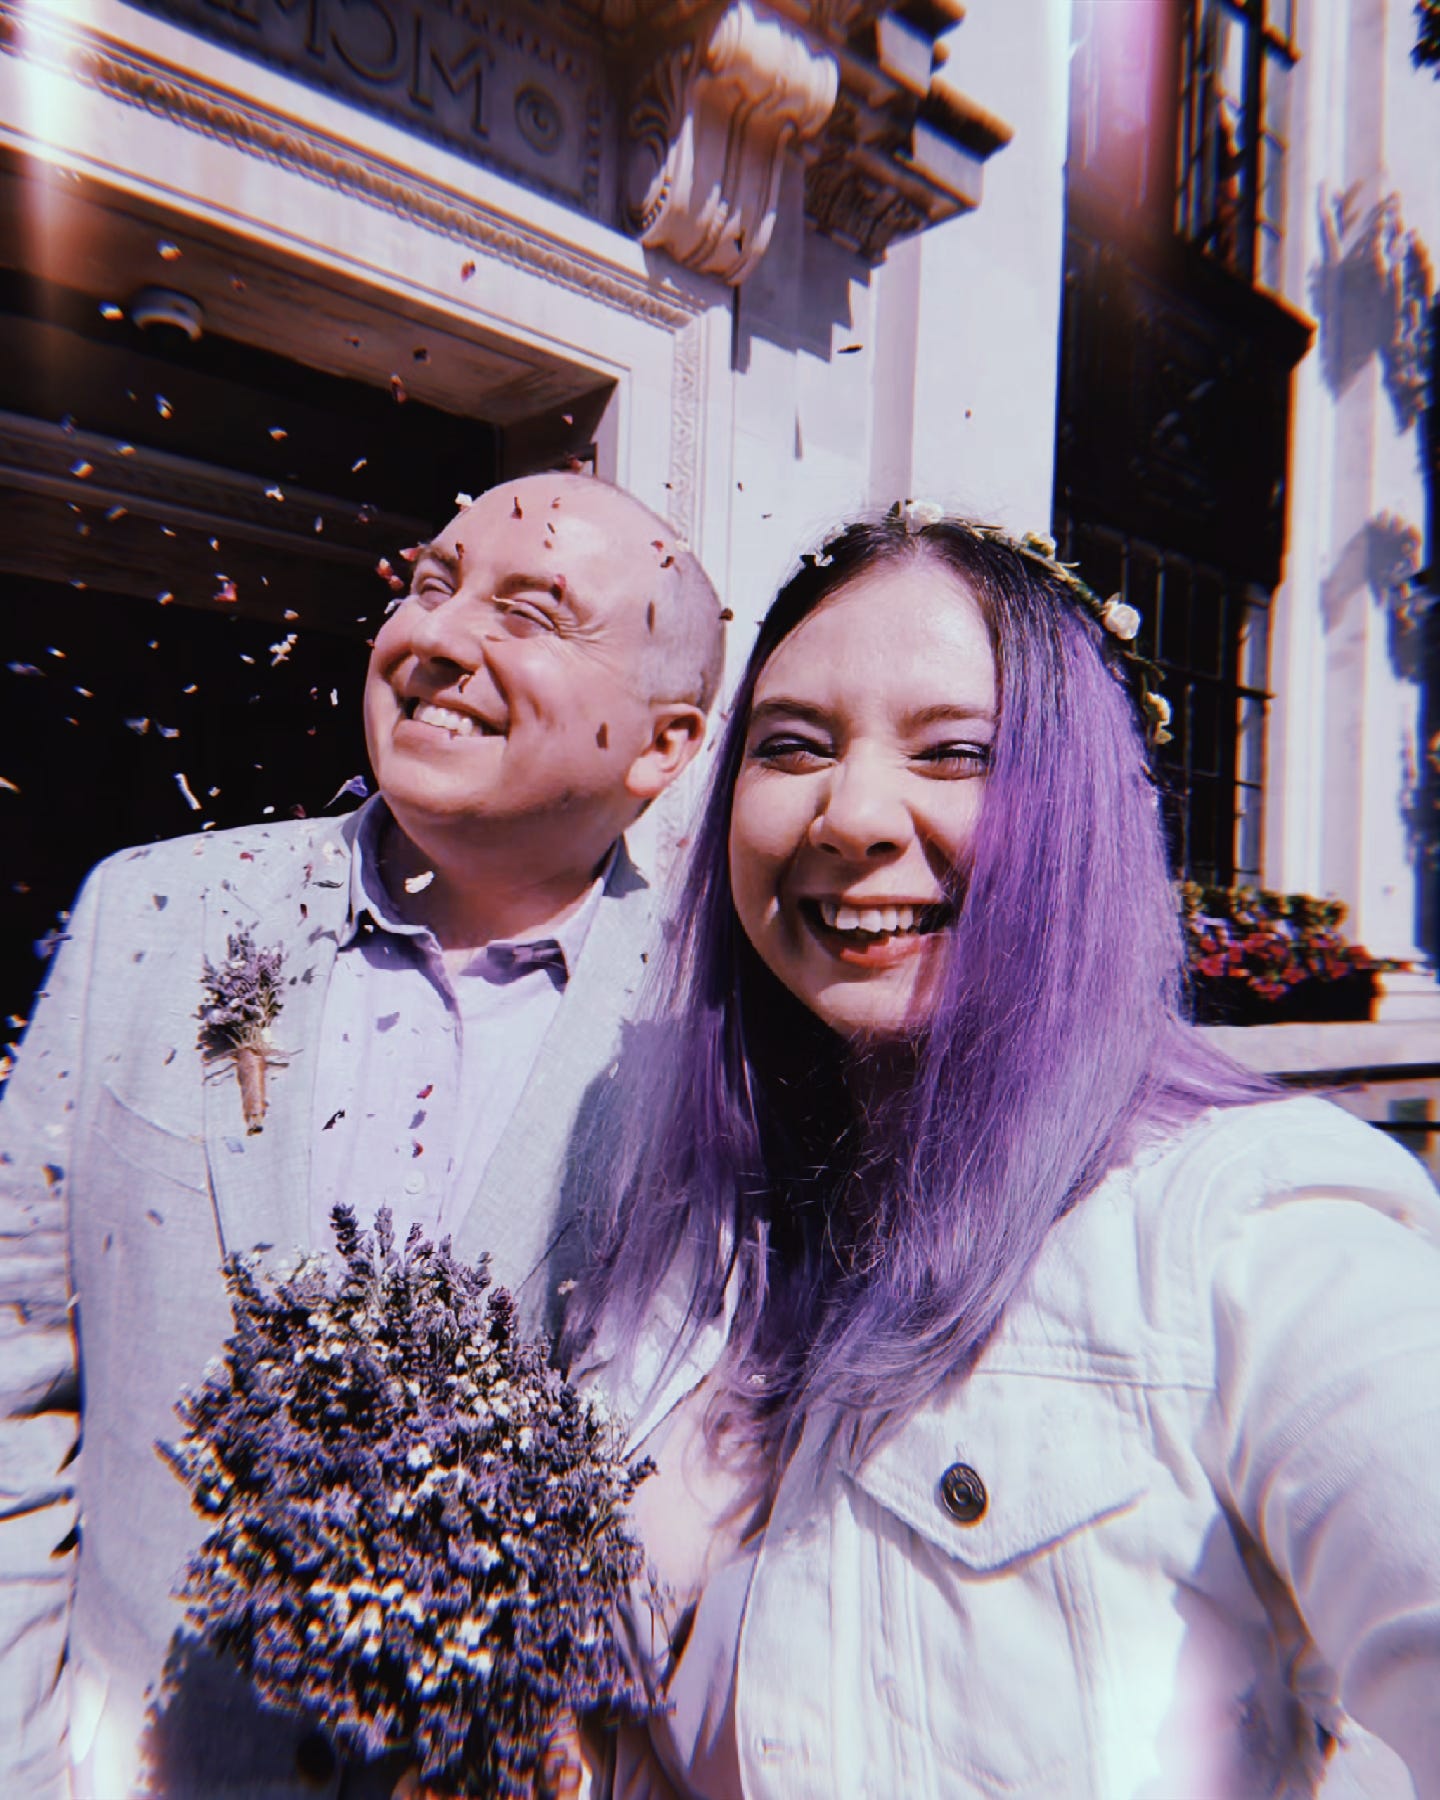 photo of a smiling couple getting flower petals thrown at them. kat's partner wears a gray linen suit with a lilac linen shirt and a dried lavender flower boutonniere. kat has long purple hair, and wears a fabric flower crown of small white roses wrapped around a green wreath, a white jean jacket, lilac dress, and holds a dried lavender flower bouquet.